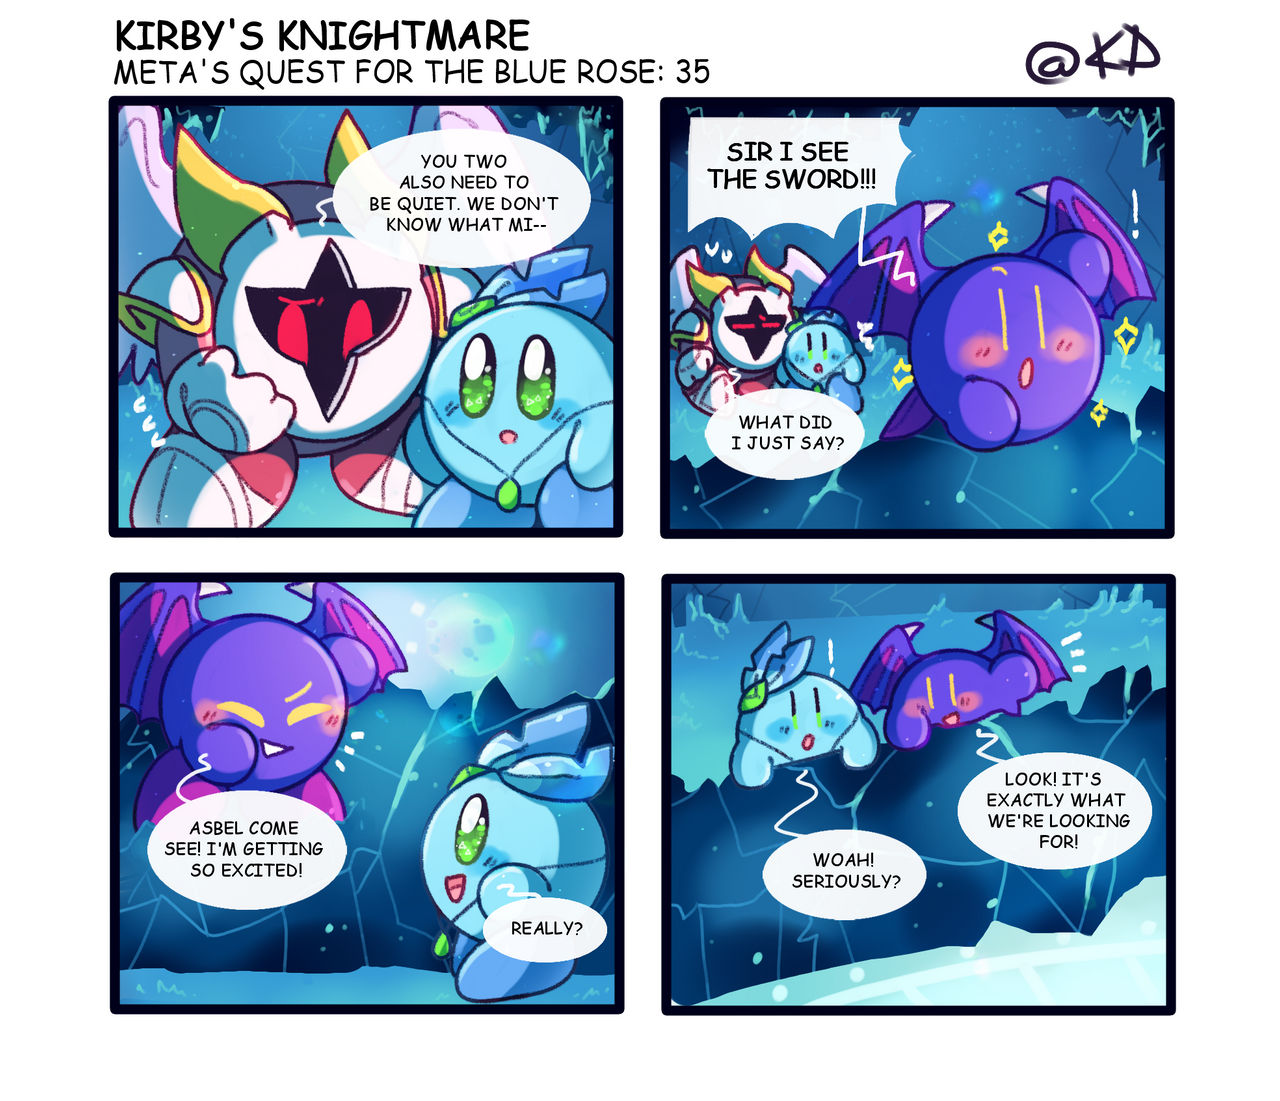 KK - Meta's Quest for the Blue Rose: 35 by Koku-Draws on DeviantArt